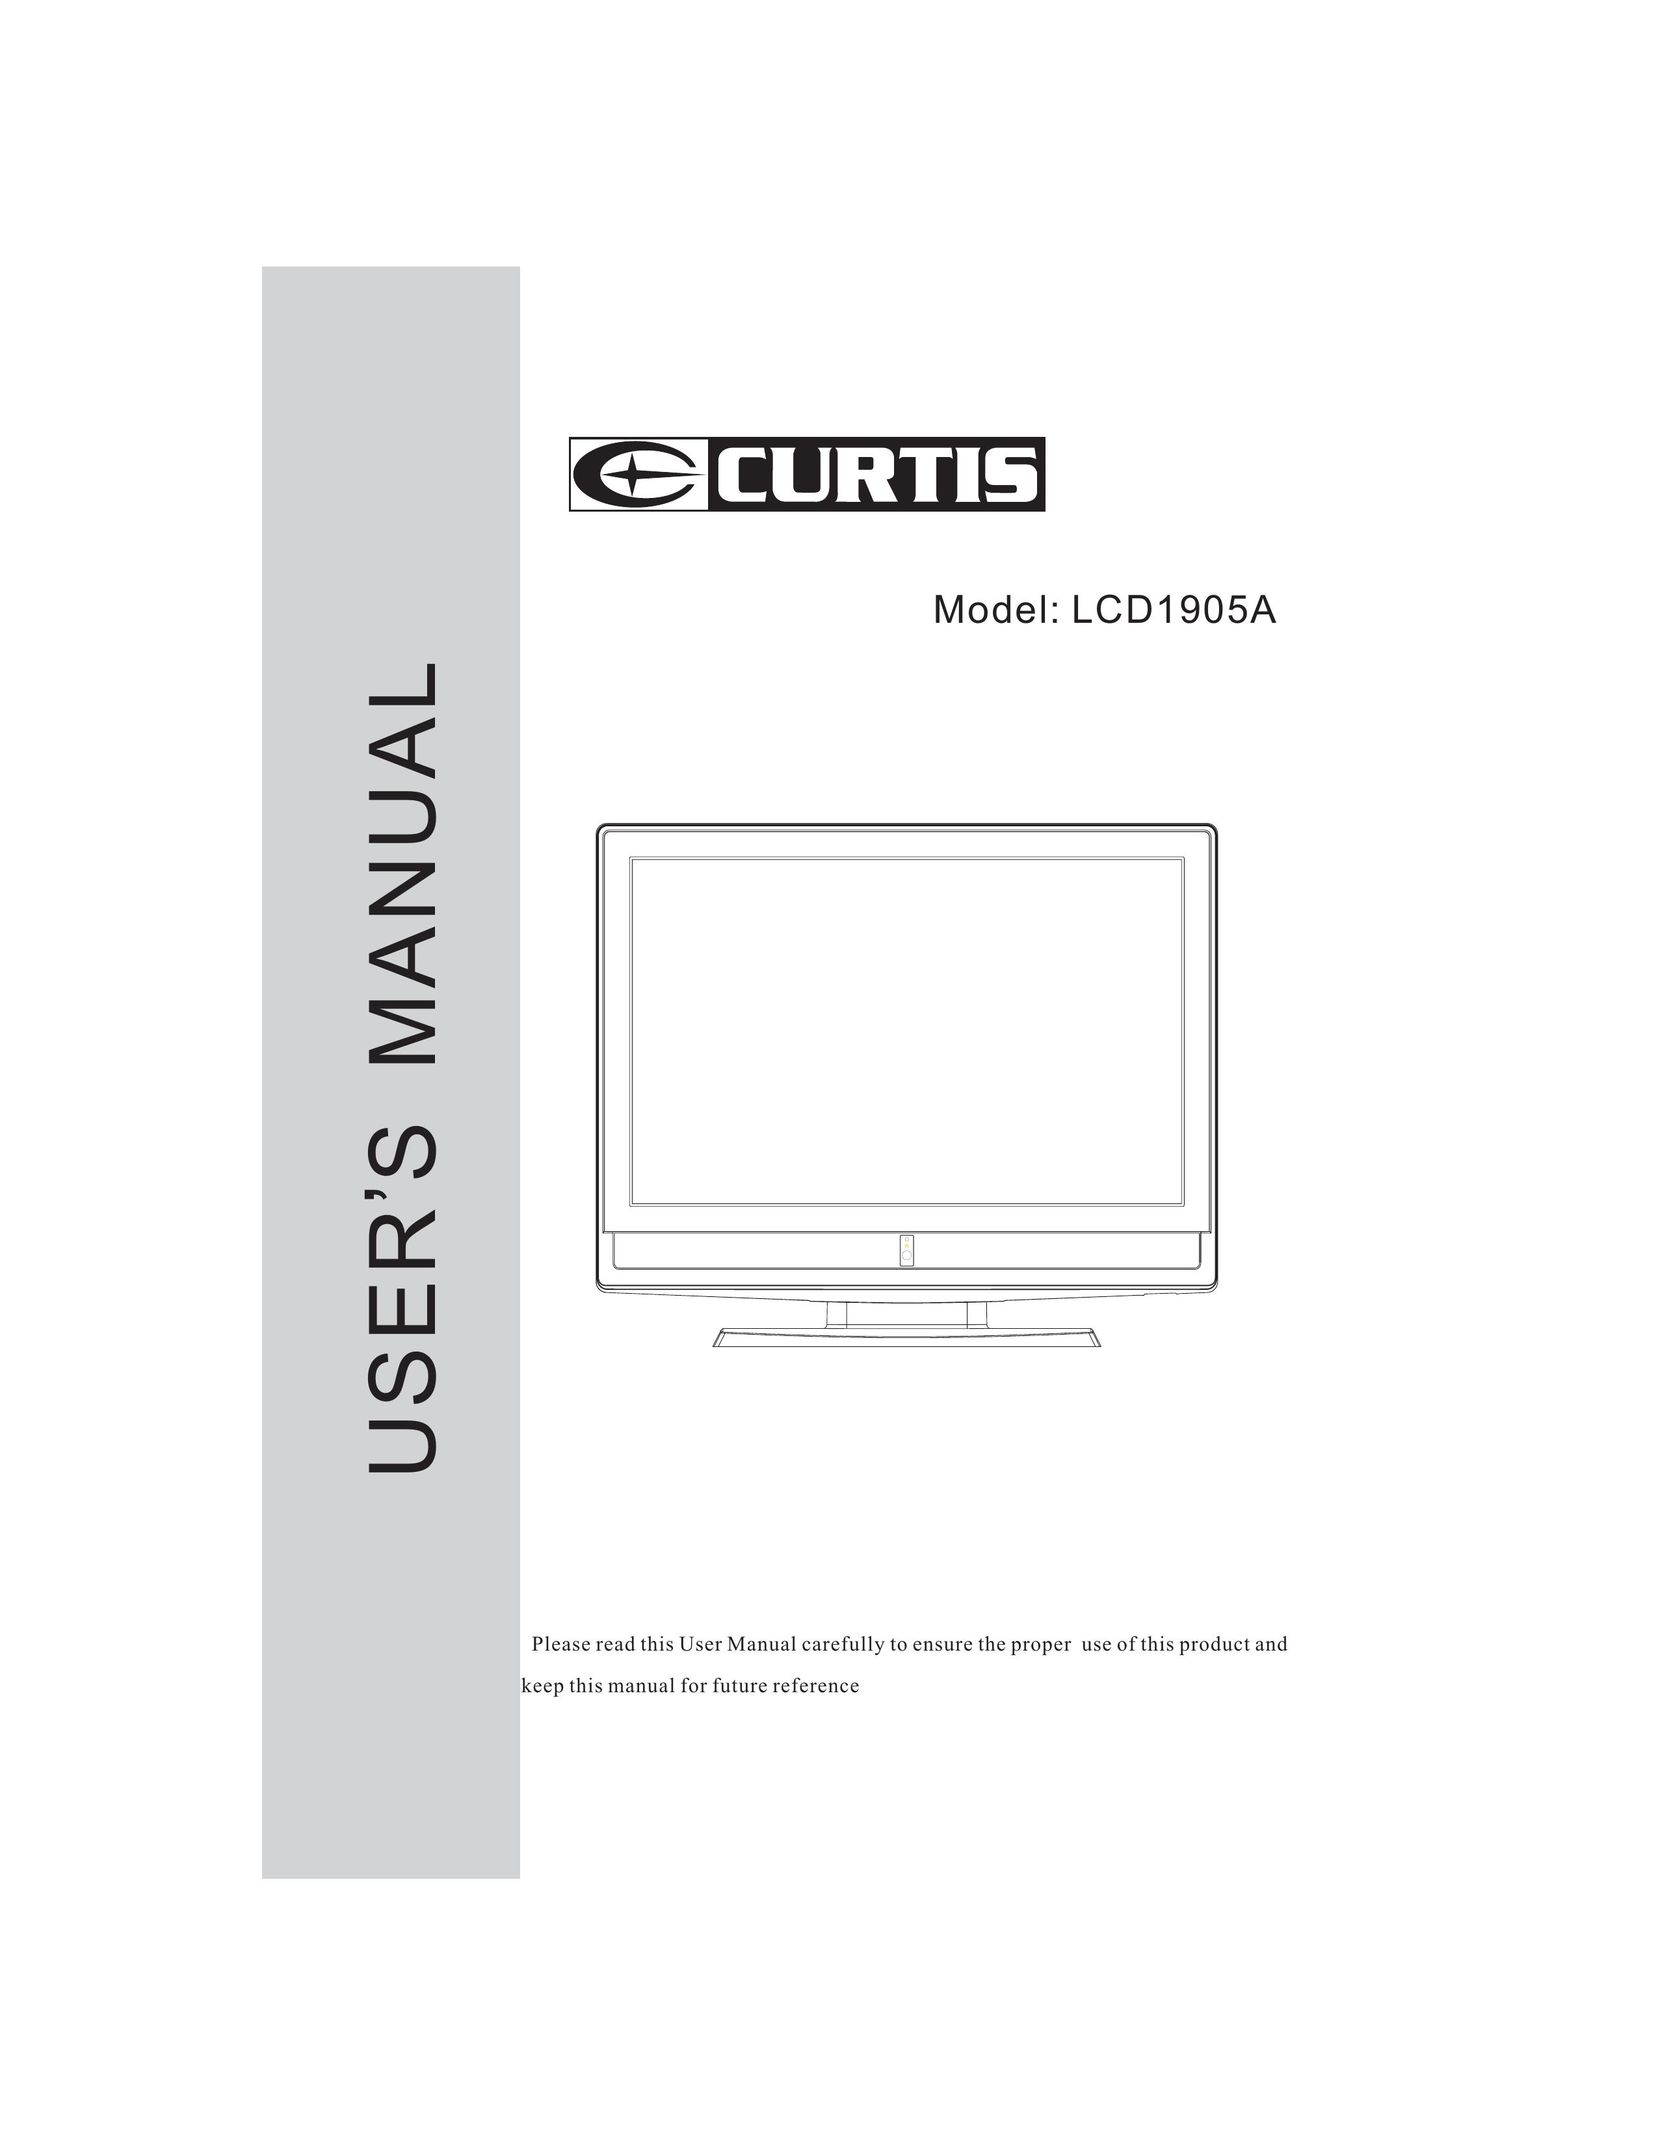 Curtis LCD1905A Flat Panel Television User Manual